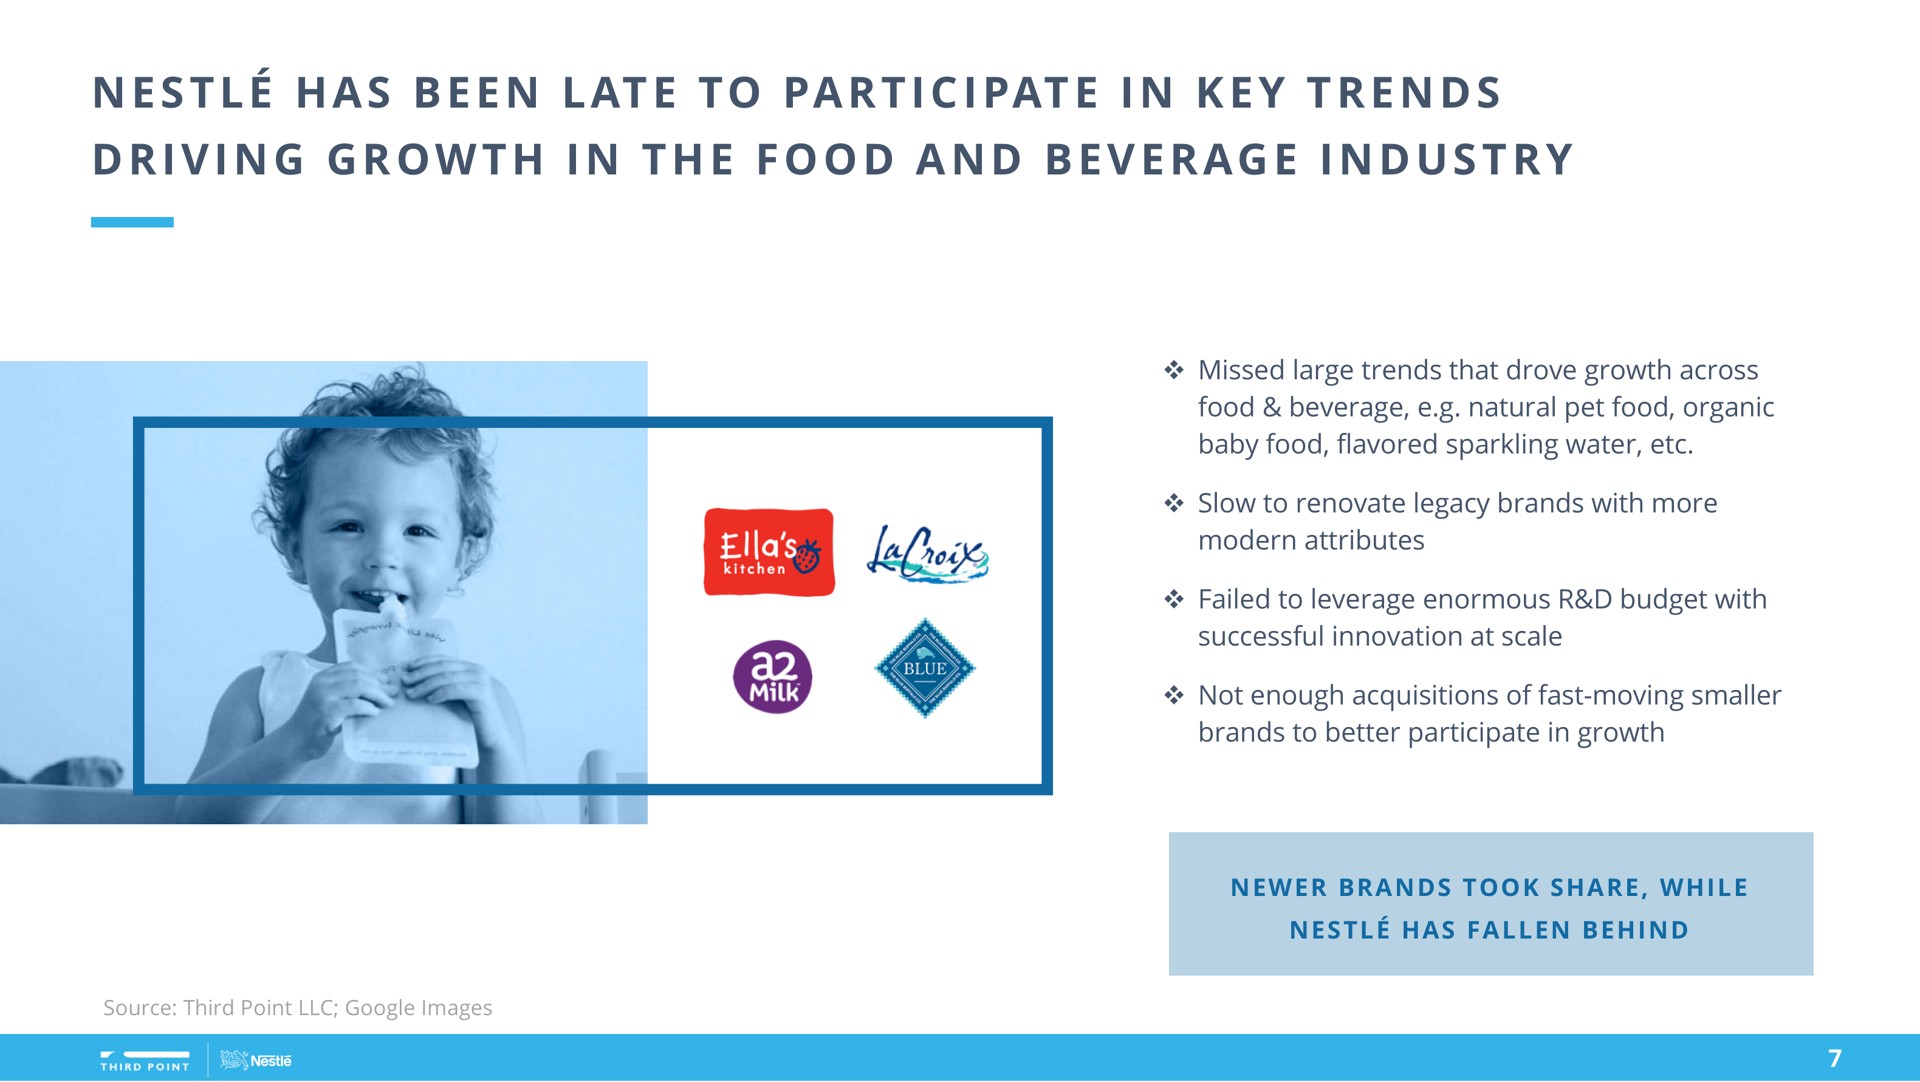 a at i i pat i i i i a i nestle has been late to participate in key trends driving growth in the food and beverage industry | Third Point Management